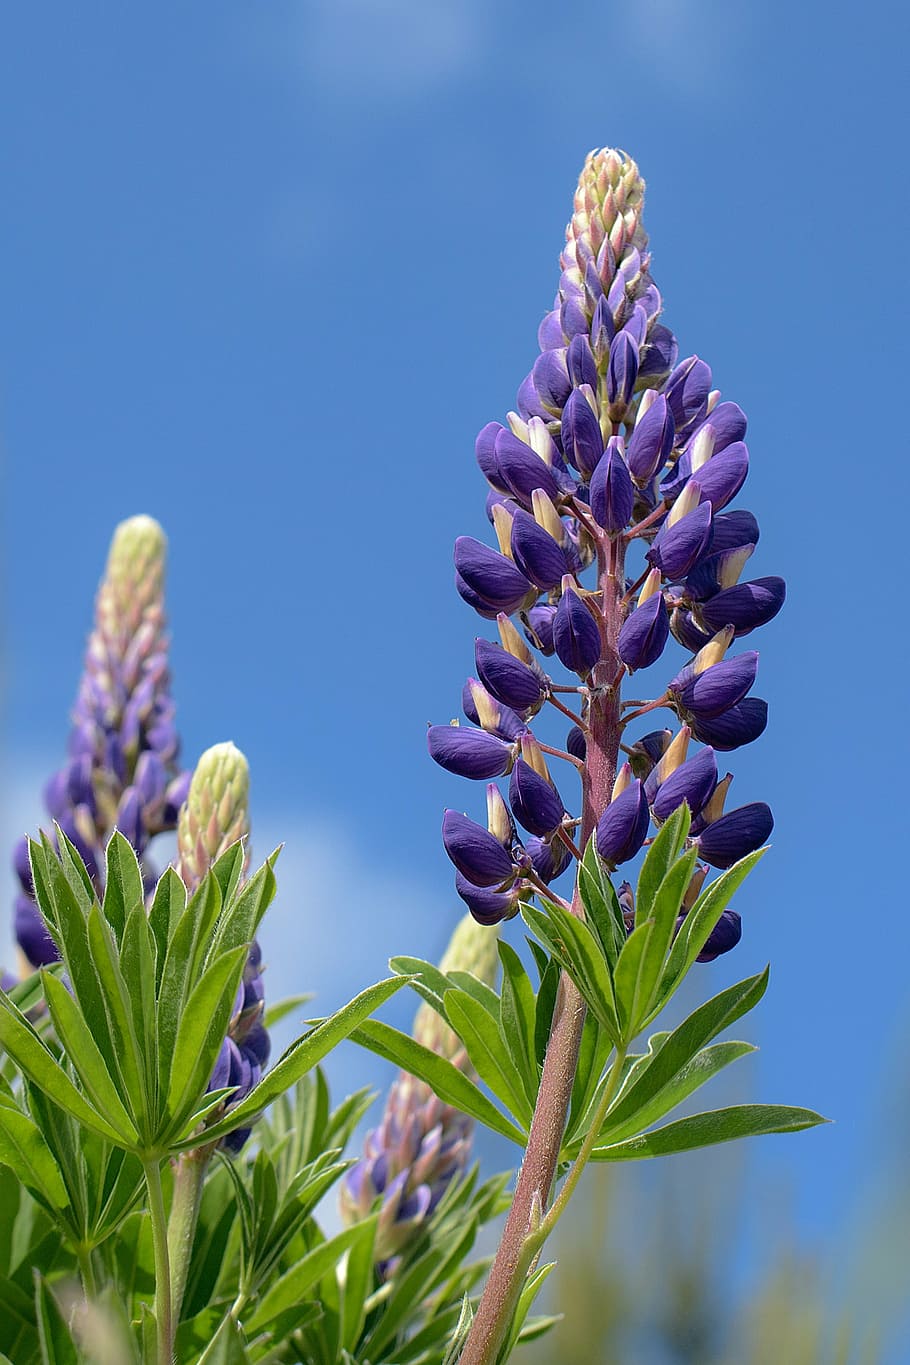 lupine, flower, inflorescence, sky, blue, growth, plant, beauty in nature, flowering plant, freshness